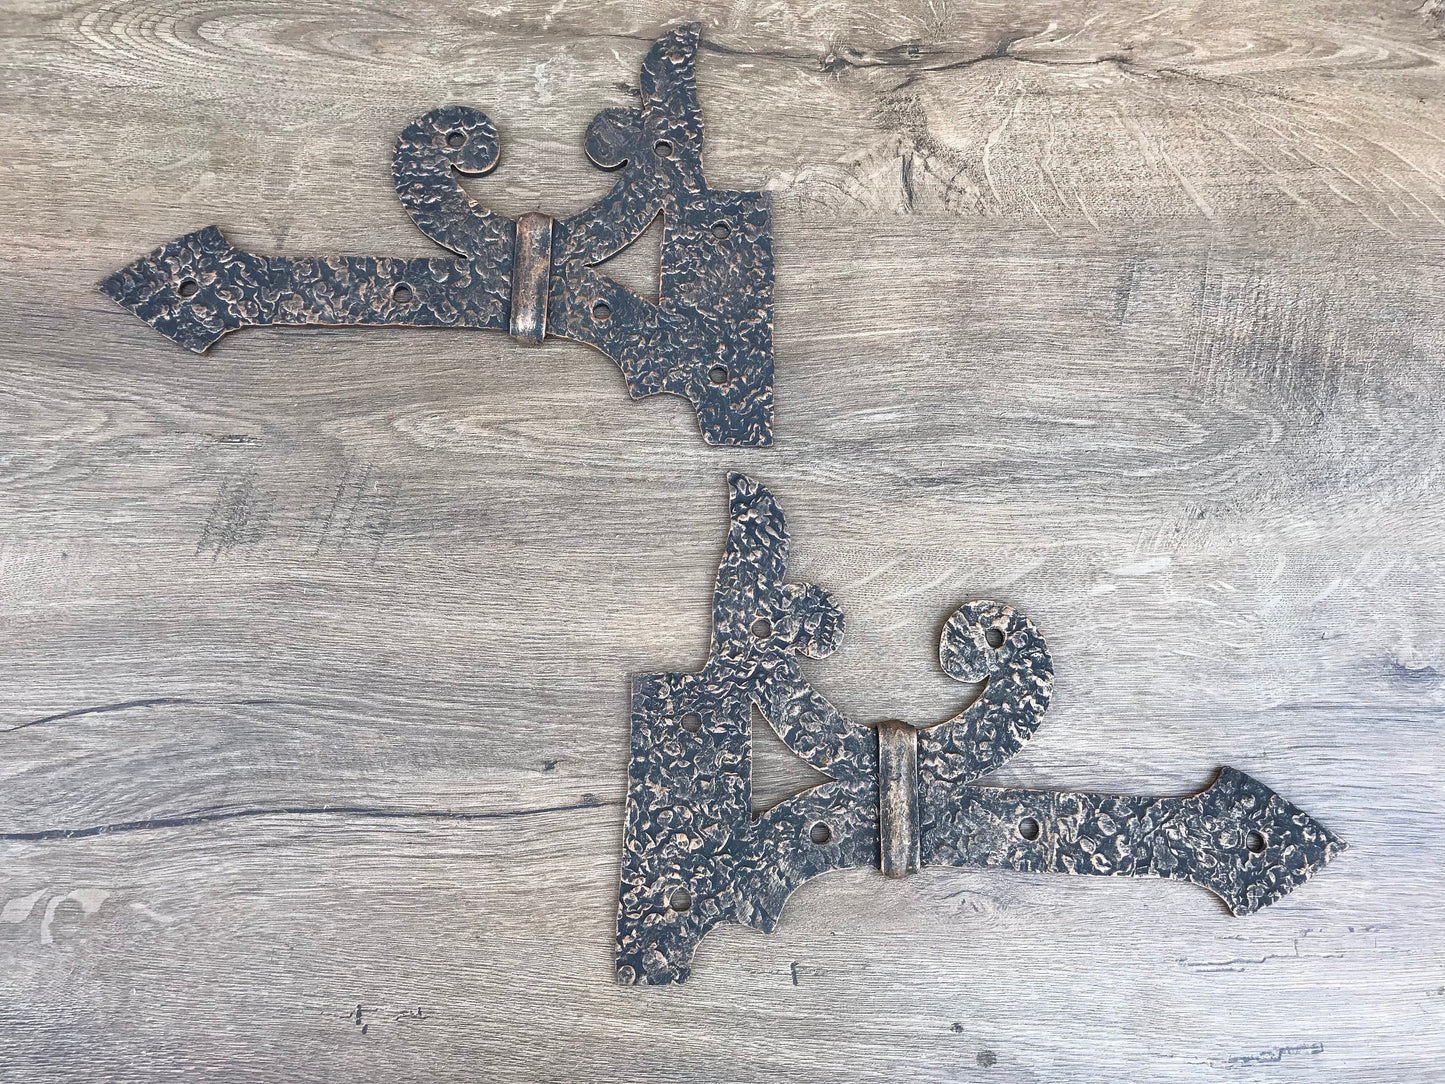 Shutter hinges, gate hinges, pair of hinges, cabinet hinges, furniture hinges, iron hinges, antique,strap hammered brackets,hand forged nail